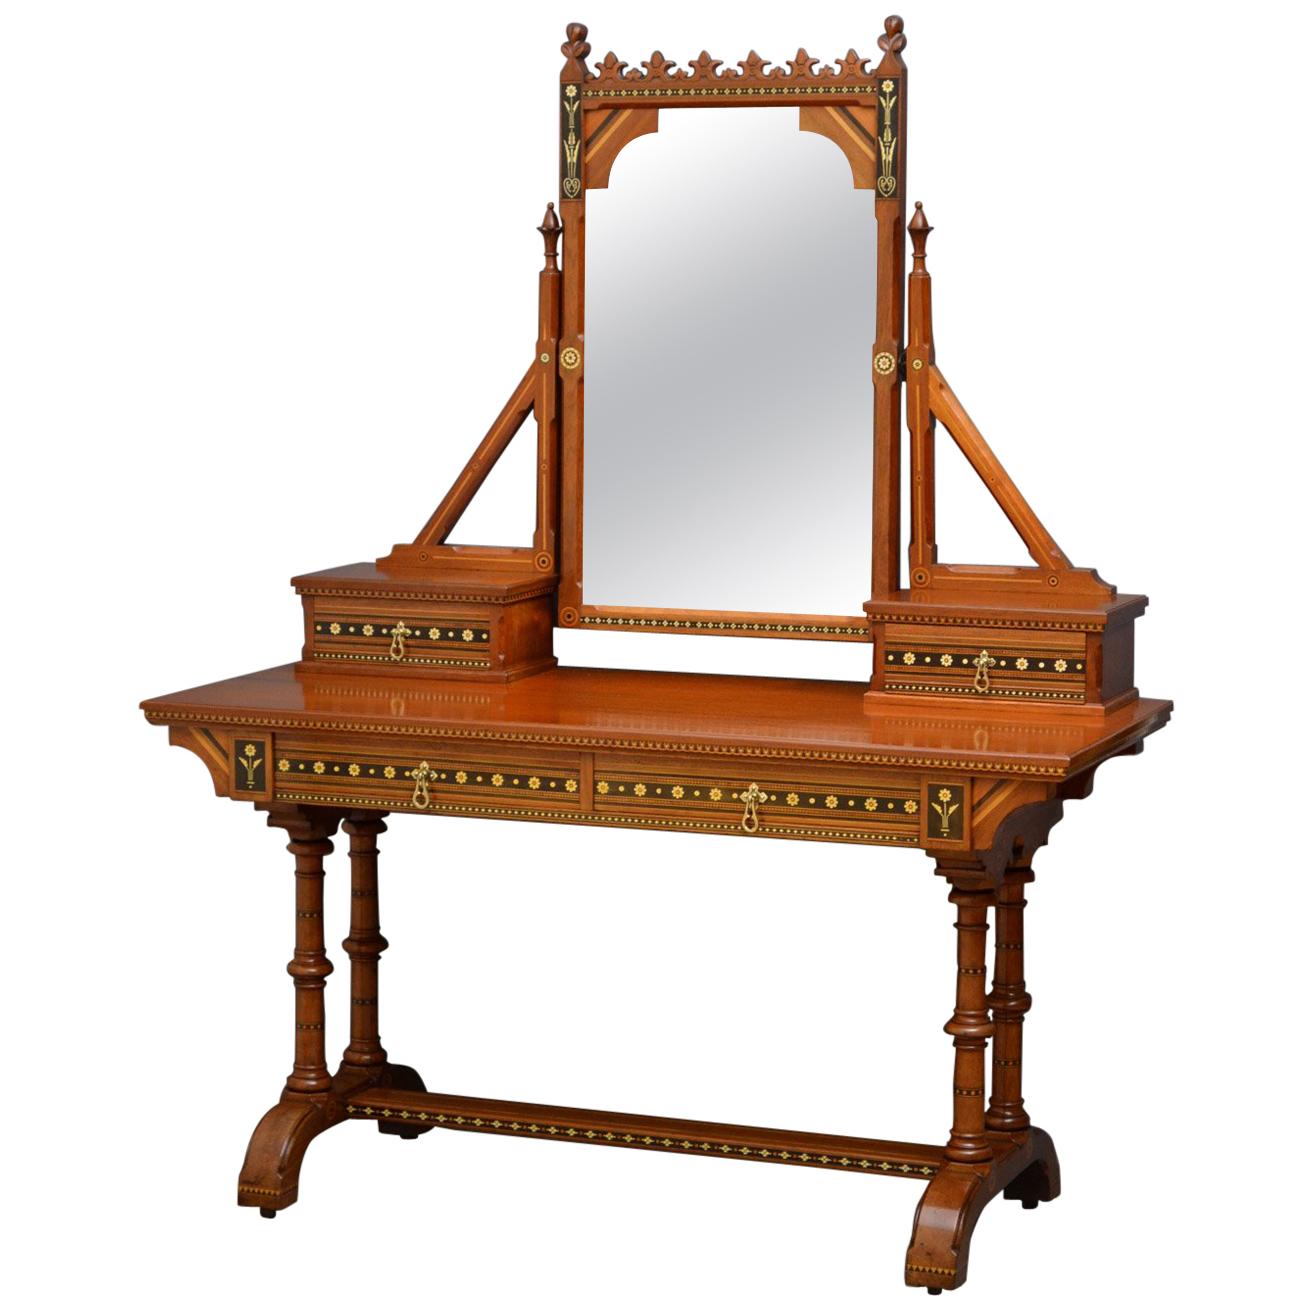 Gothic Revival Dressing Table